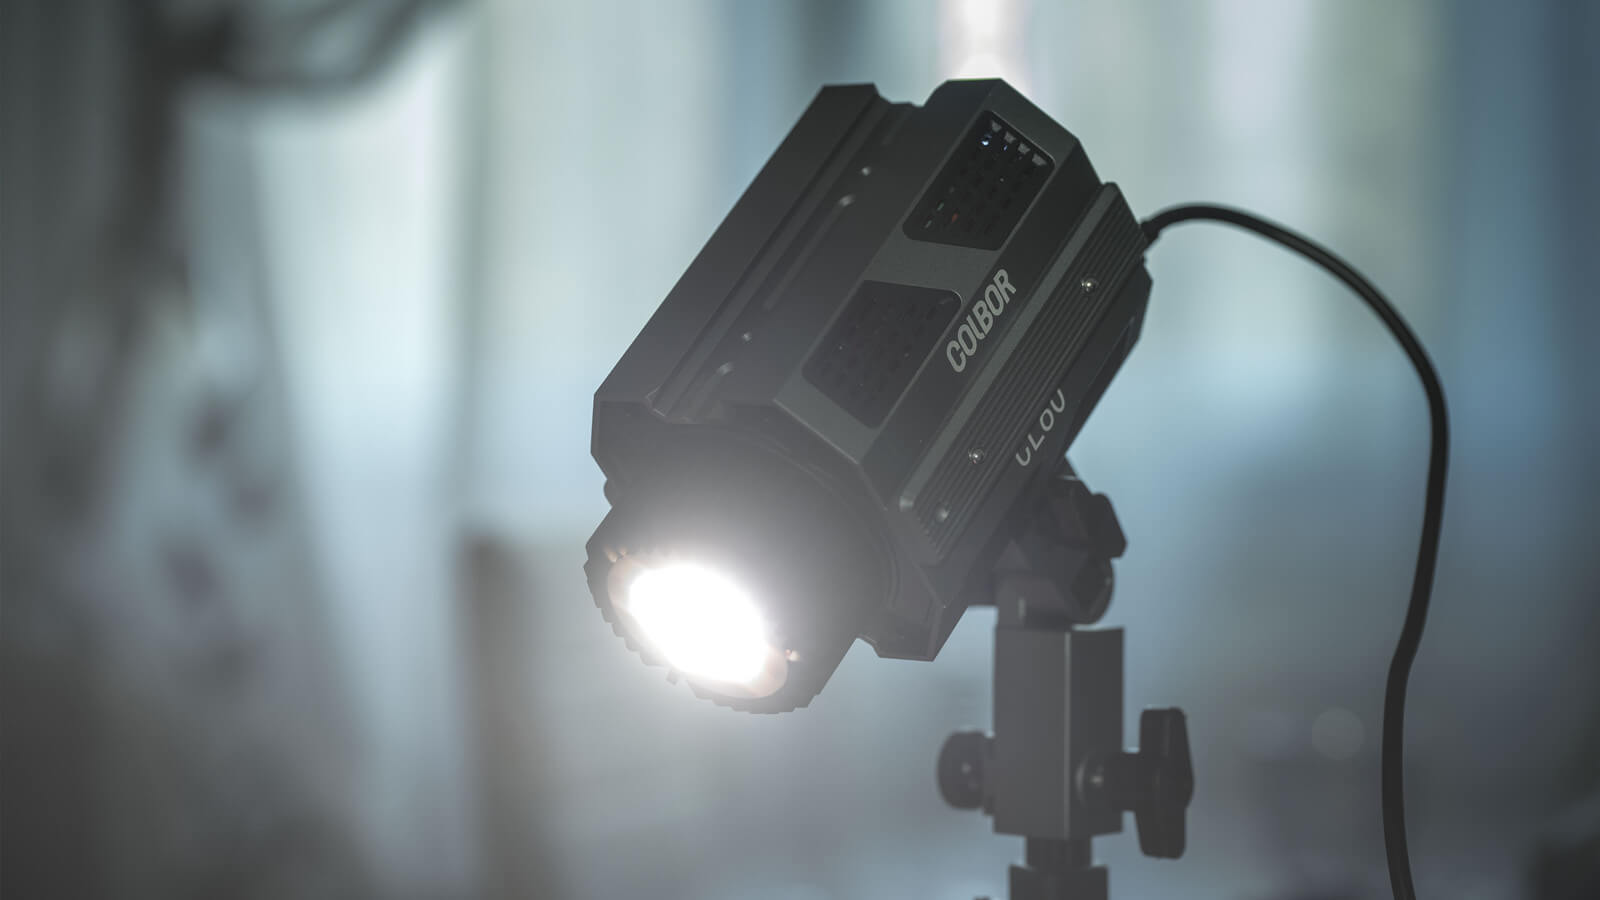 COLBOR CL60 best studio light for video is mounted on the light stand and shines down to illuminate the scene.